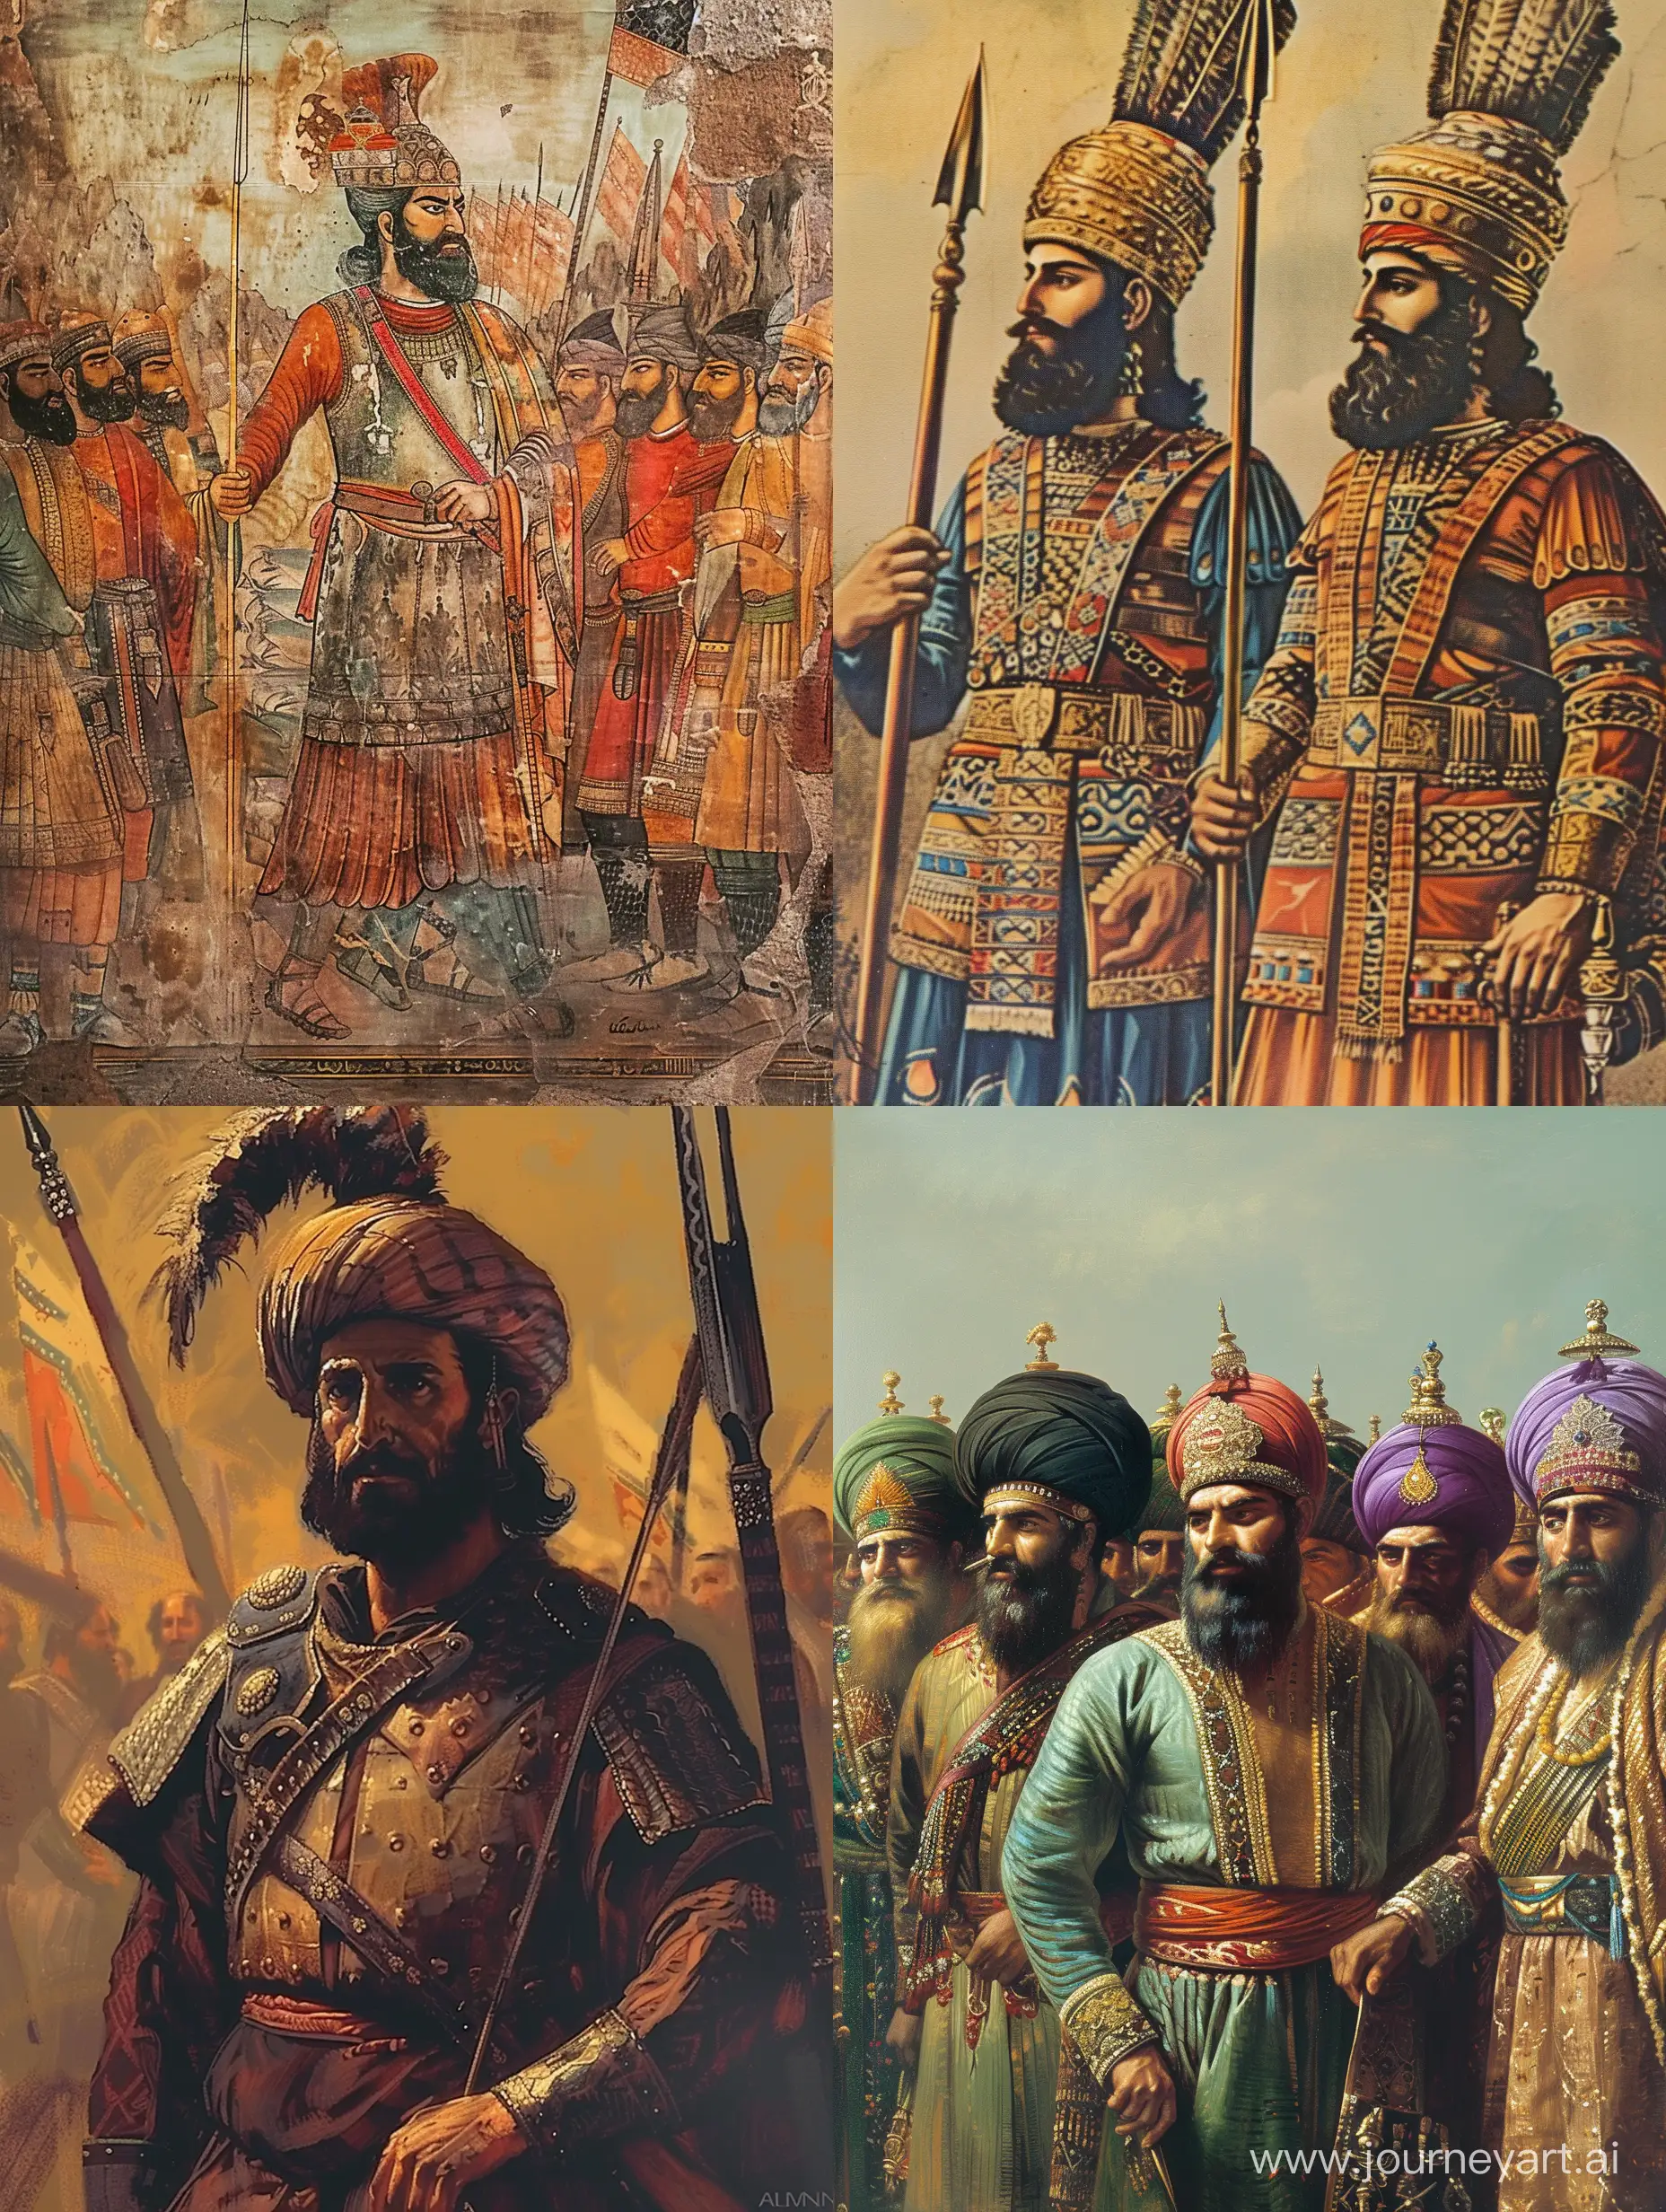 Captivating-Depiction-of-Iranian-Empire-and-Sassanid-Glory-in-a-34-Aspect-Ratio